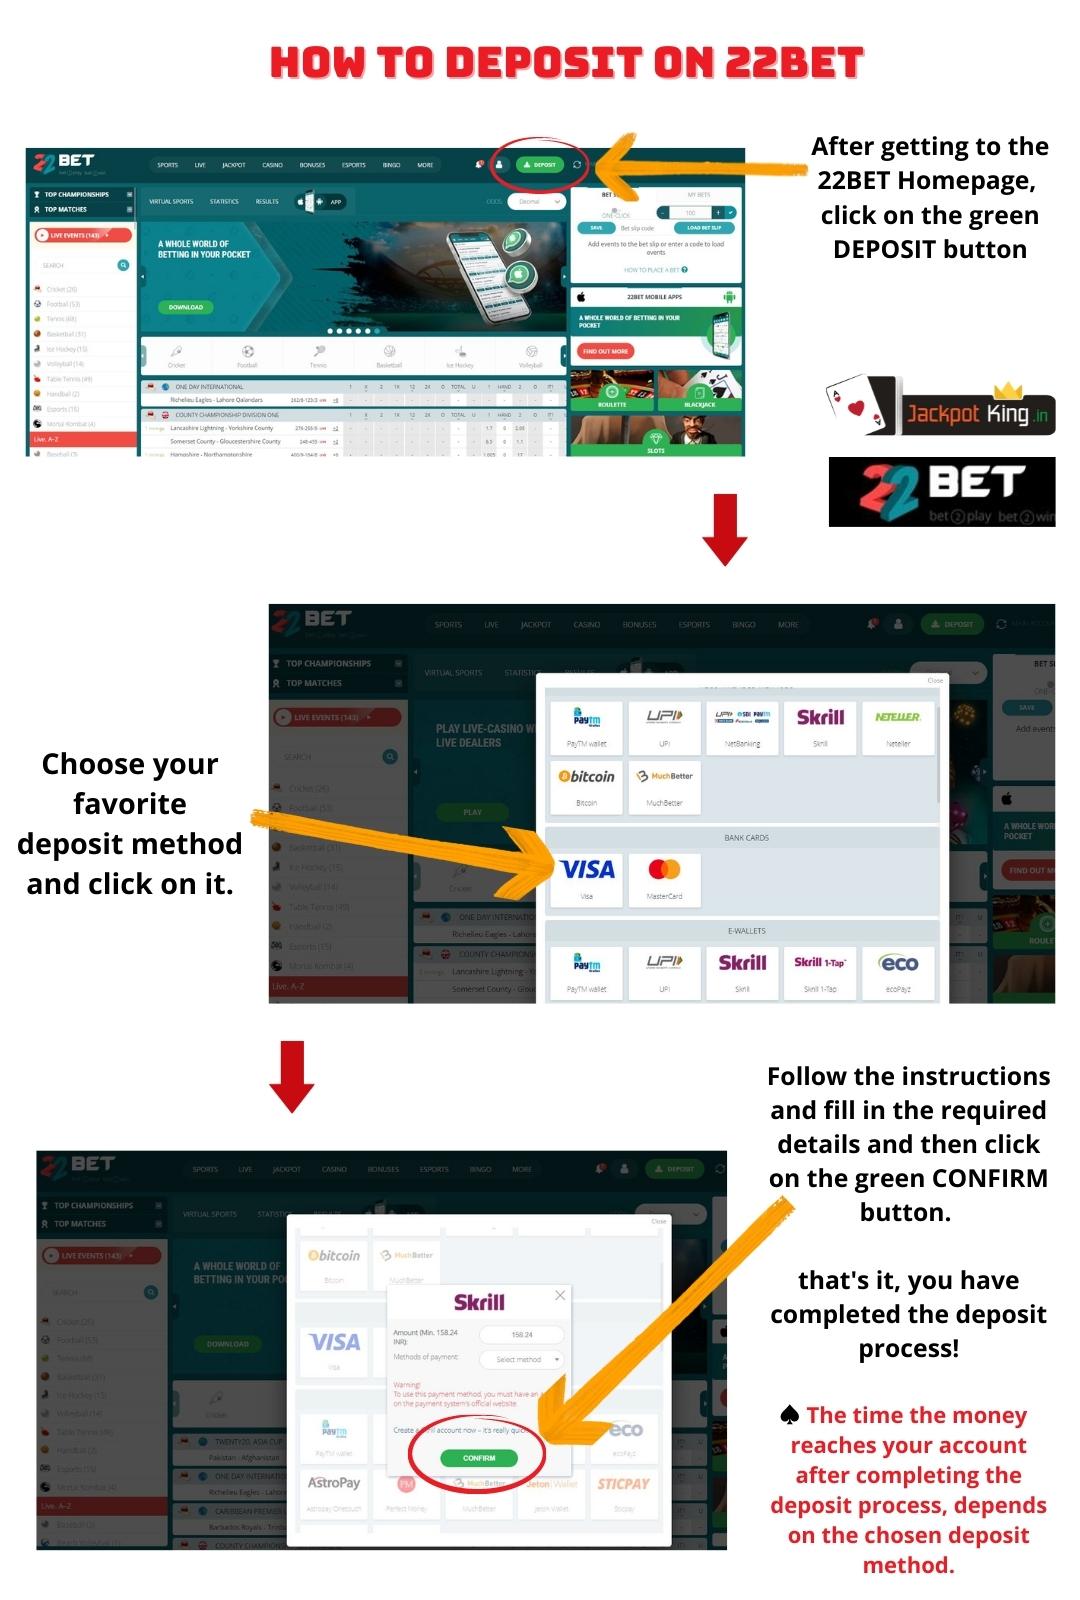 How to Deposit on 22BET - Visual Guide